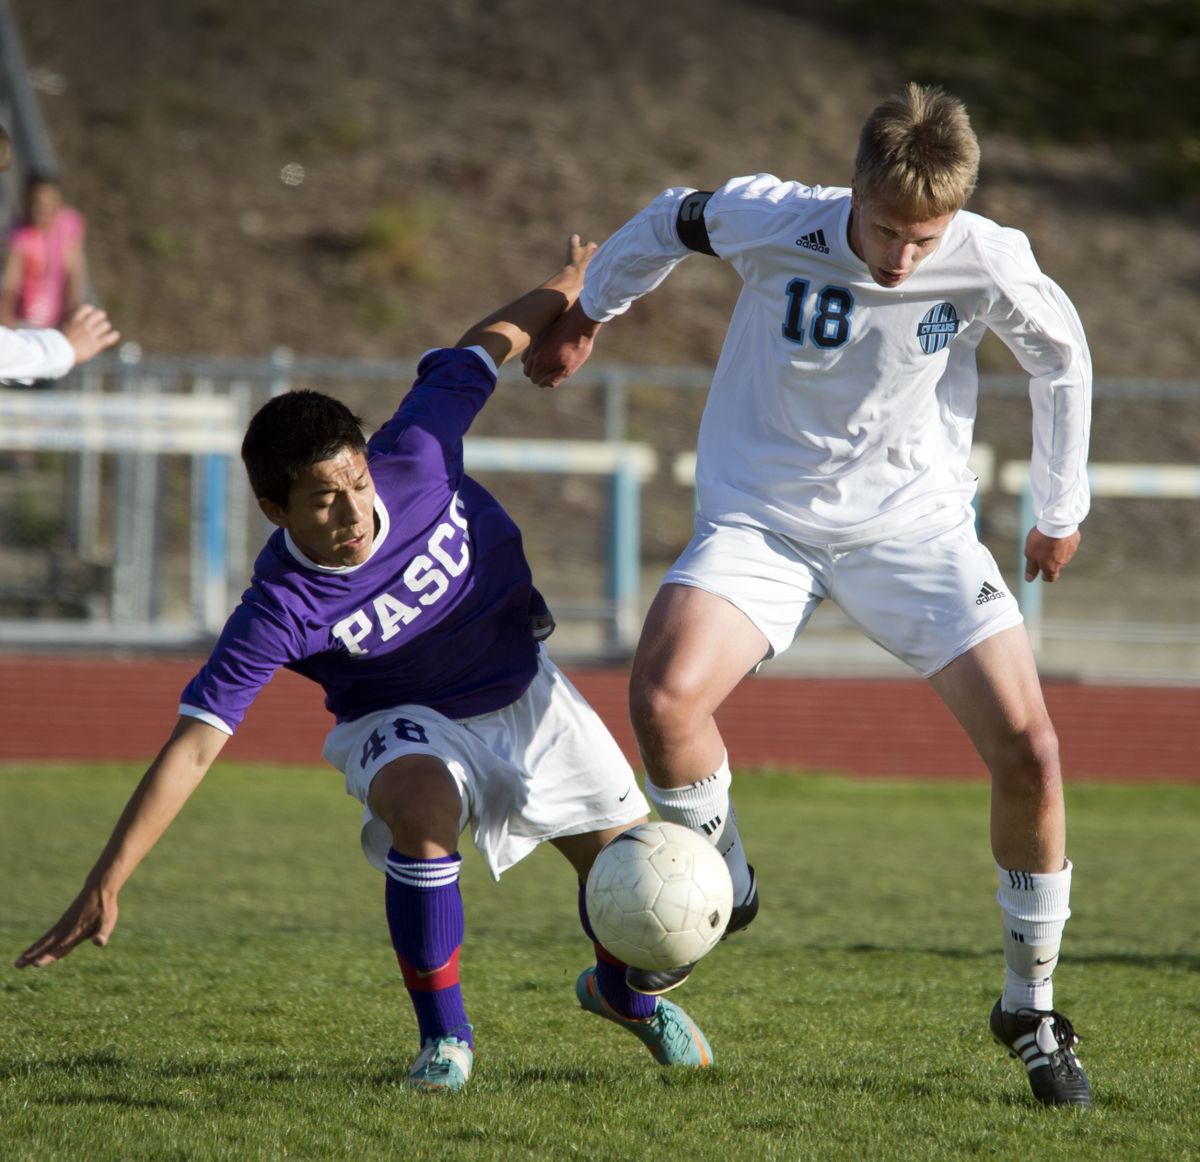 Central Valley’s Karl Ellingson knocks Pasco’s Joel Valle off the ball during the first half of the regional championship May 13 at Central Valley High School. (Dan Pelle)